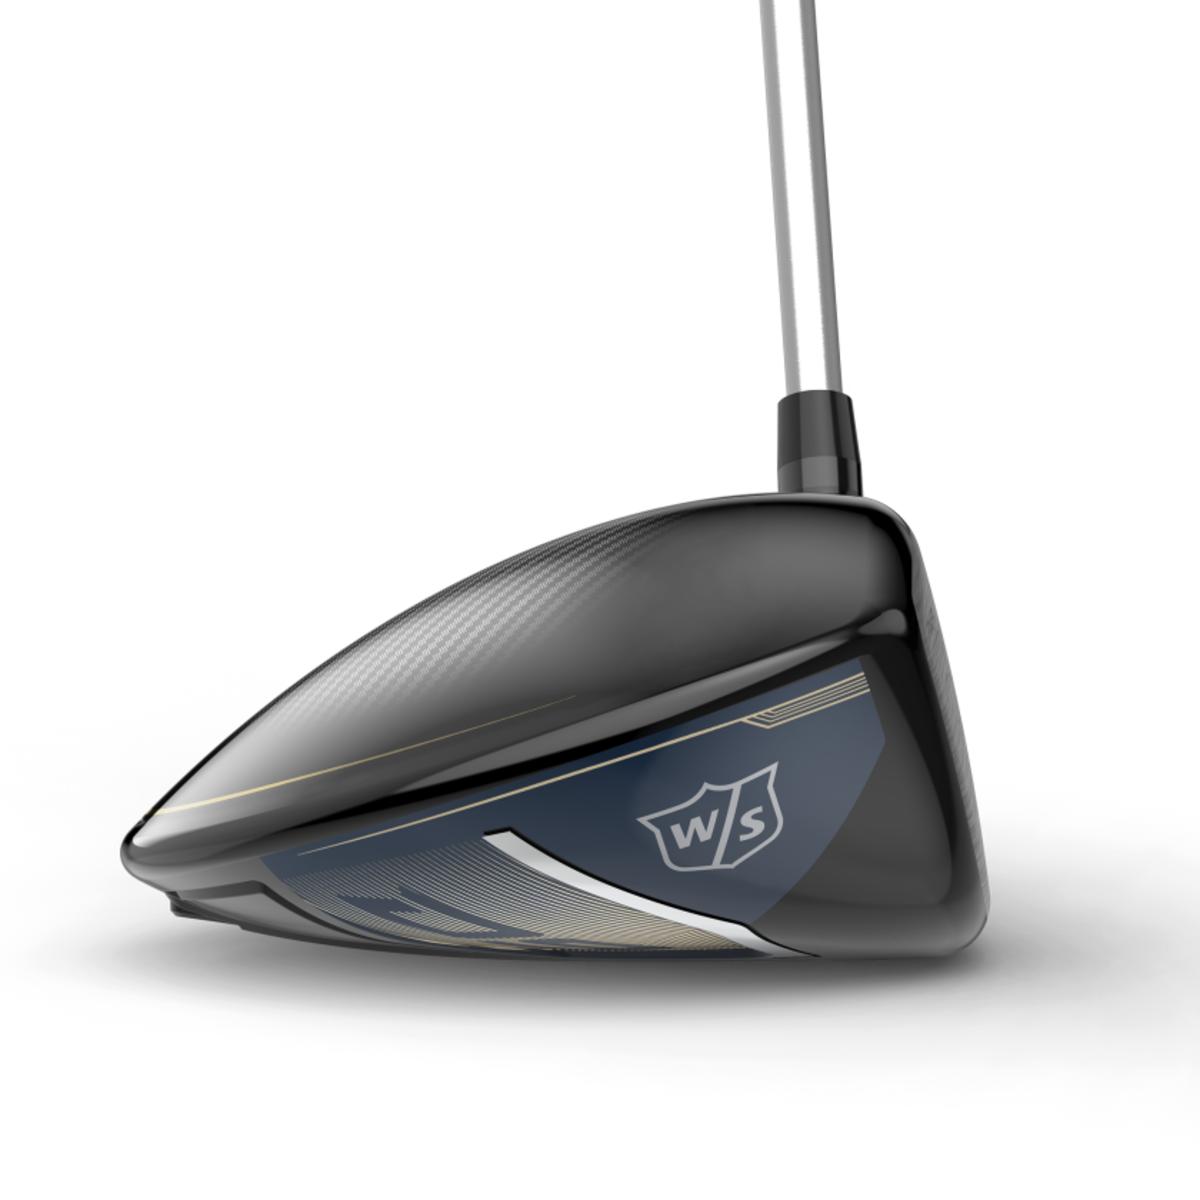 Data points allowed Wilson Golf equipment engineers to identify where most amateur players mishit drives most often. The result is a driver face that provides more forgiveness on drives hit slightly low and toward the heel.